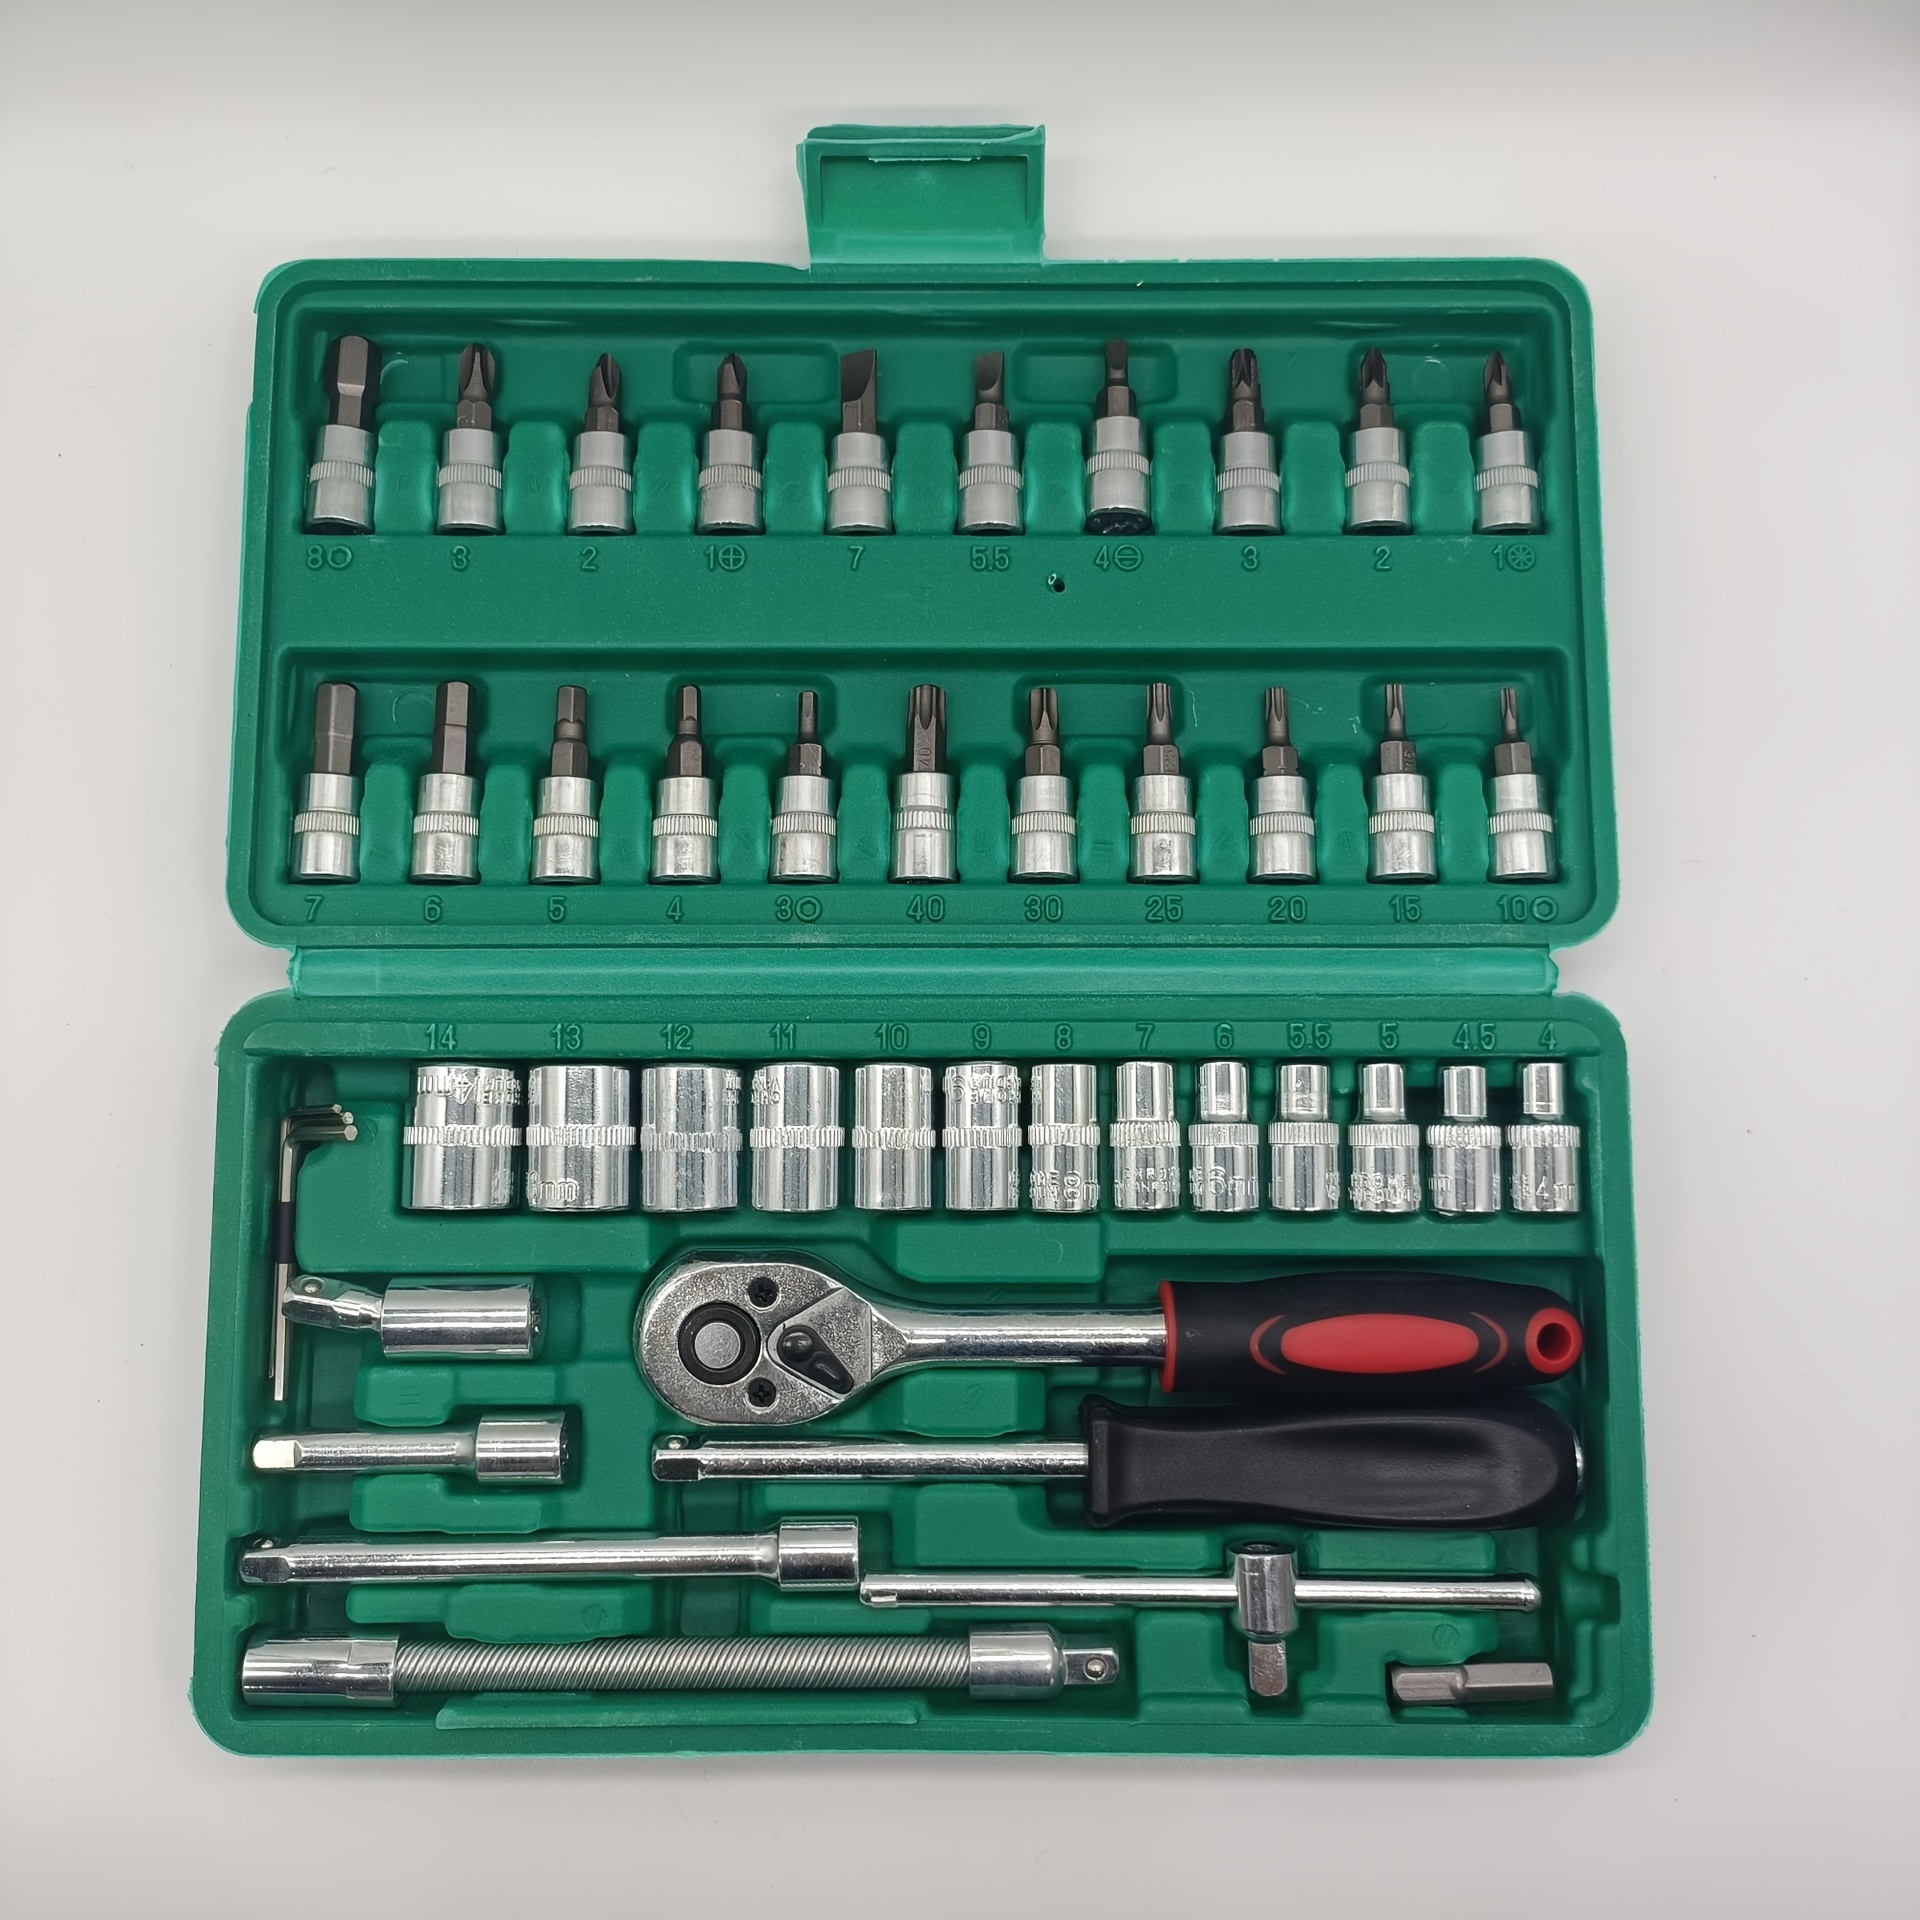 

46-piece Set Of Auto Repair Tools, Socket Tool Set With Ratchet Wrench, Punch Head Combination Tool Set For Auto Parts